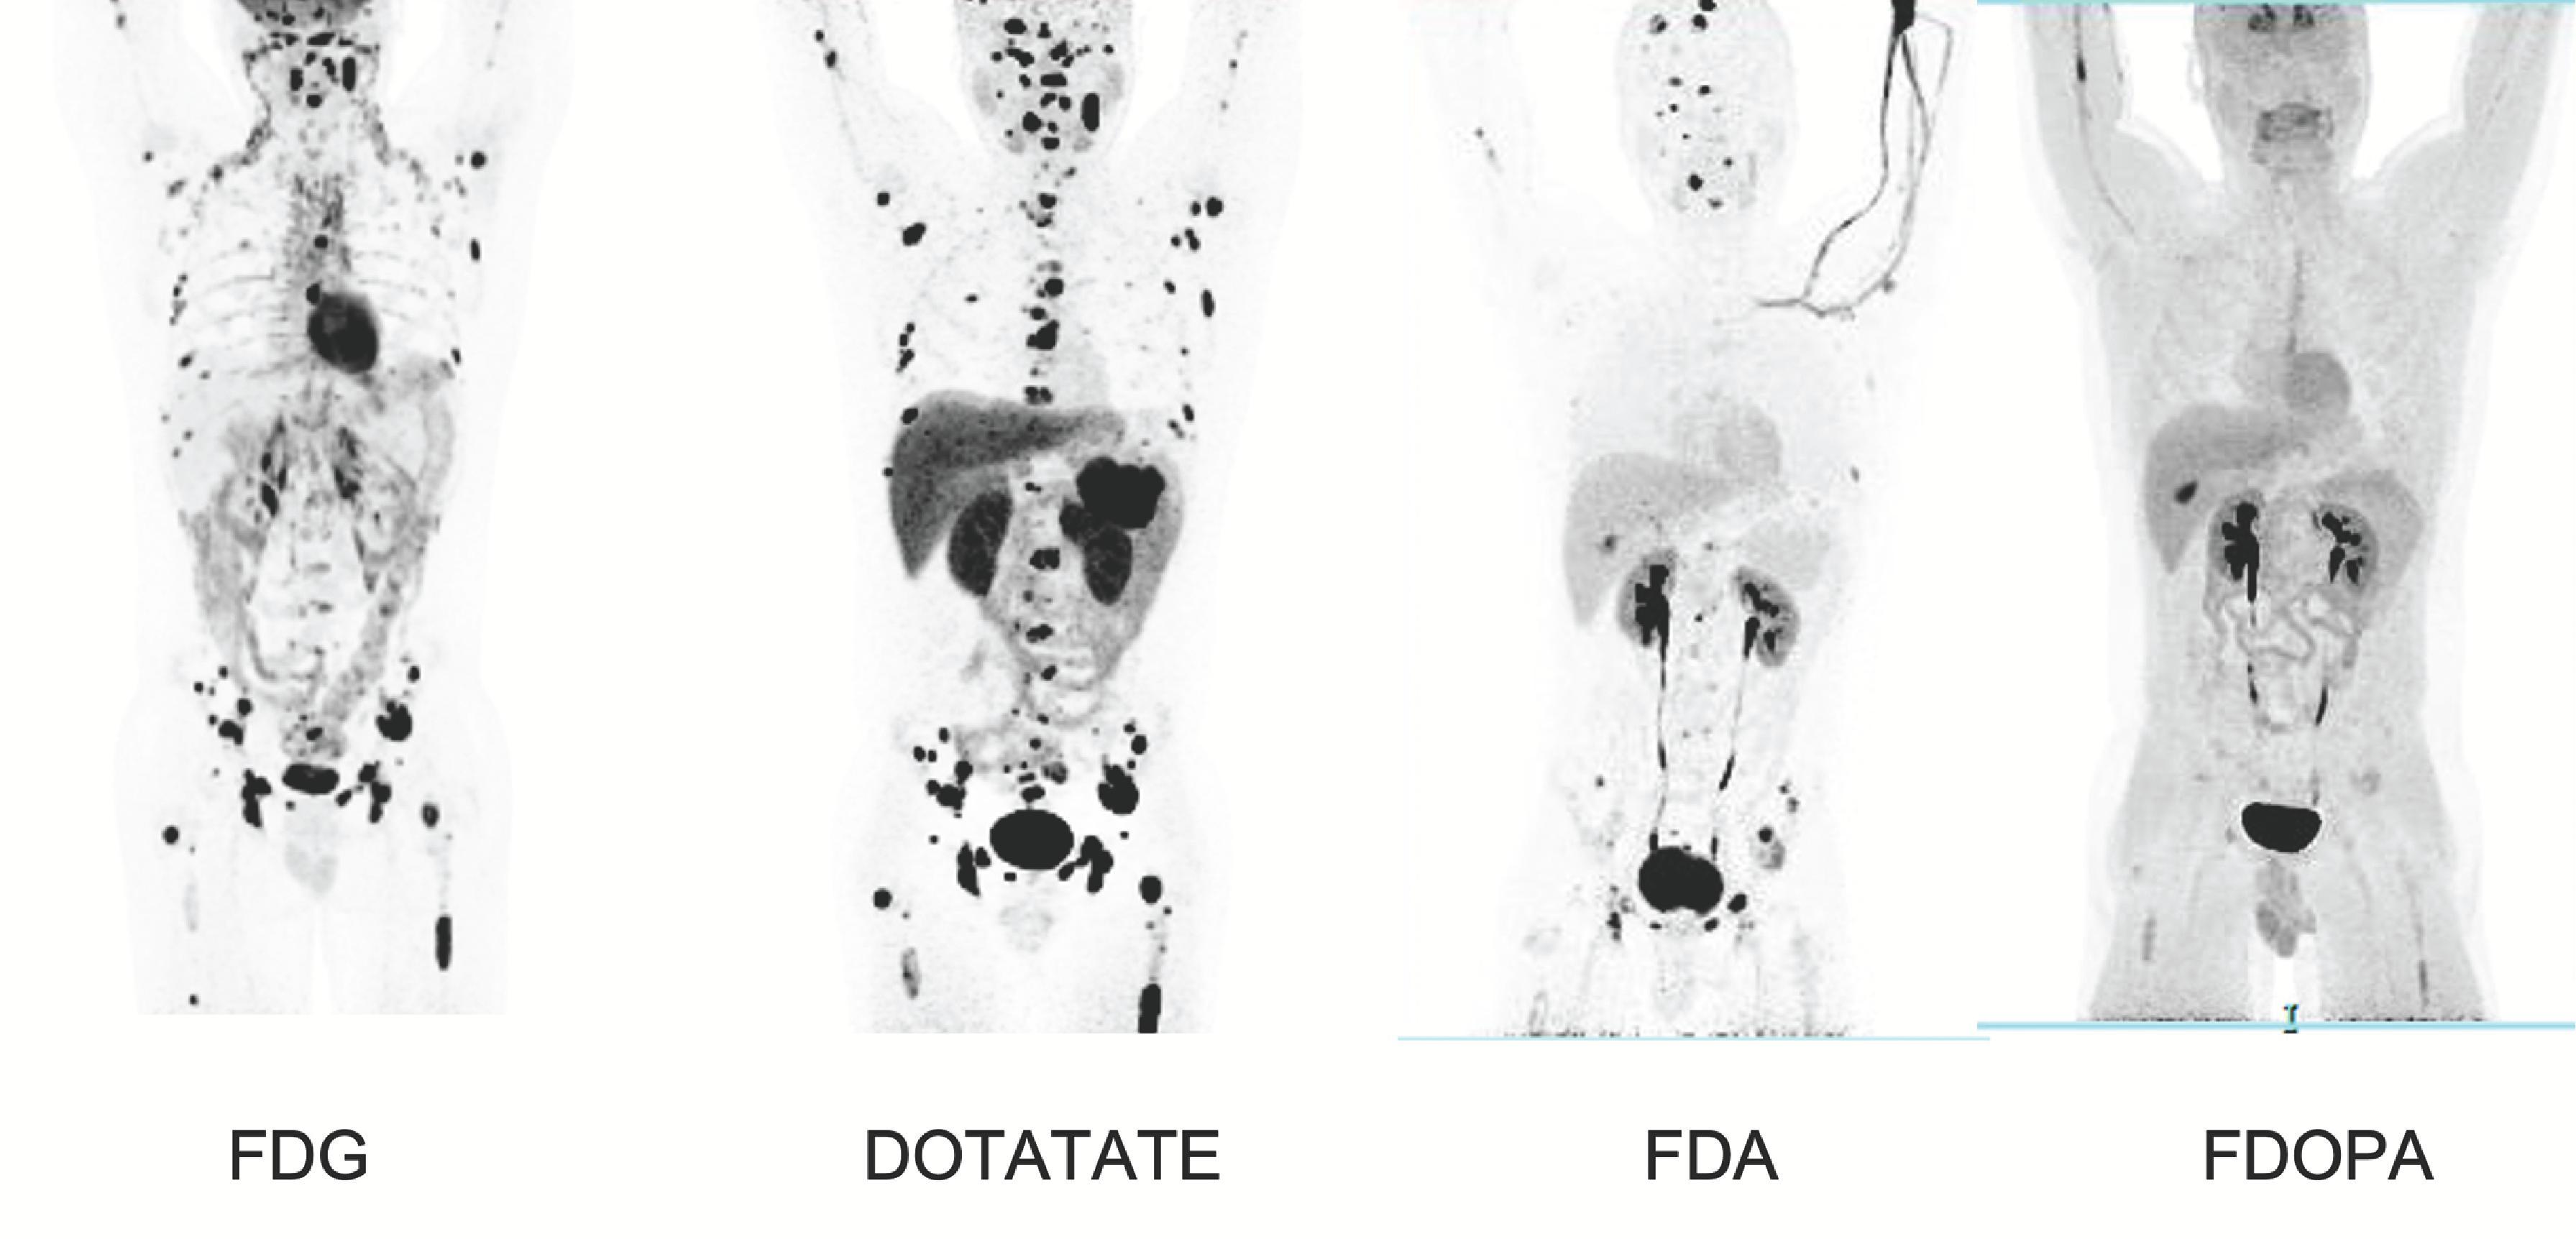 FIG. 2, Functional imaging in a patient with metastatic and recurrent pheochromocytoma. 18 F-fluorodeoxyglucose (FDG), 68 Ga-DOTATATE, 18 F-fluorodopamine (FDA), and 18 F-3,4-dihydroxyphenylalanine (FDOPA). The DOTATATE imaging shows the greatest number of metastatic lesions followed by FDG and FDA, and none is seen on FDOPA.